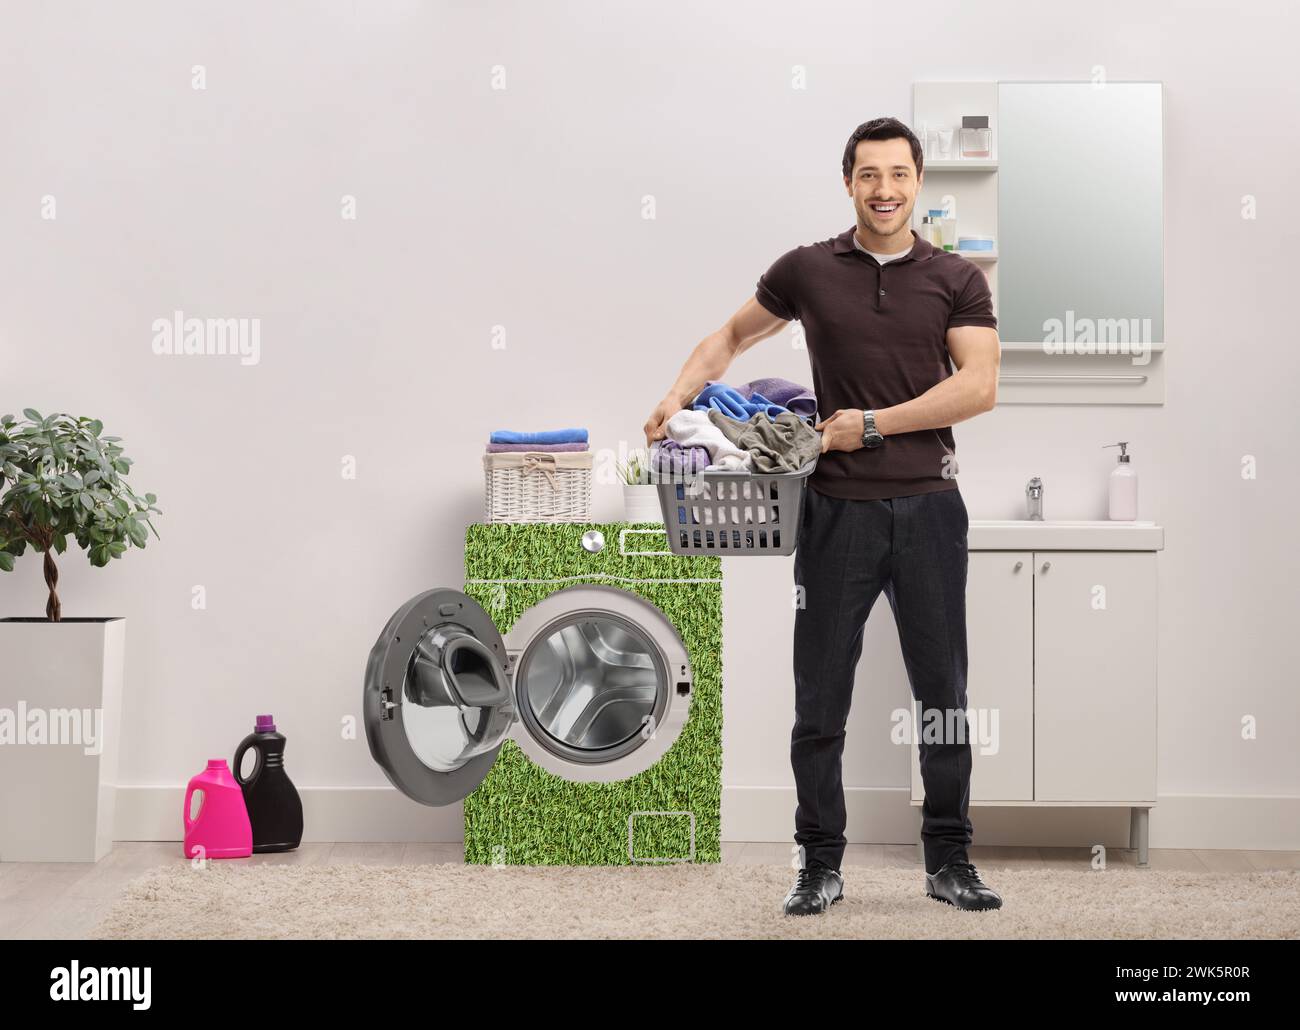 Young man with a laundry basket full of clothes standing in a bathroom next to energy efficient washing machine Stock Photo